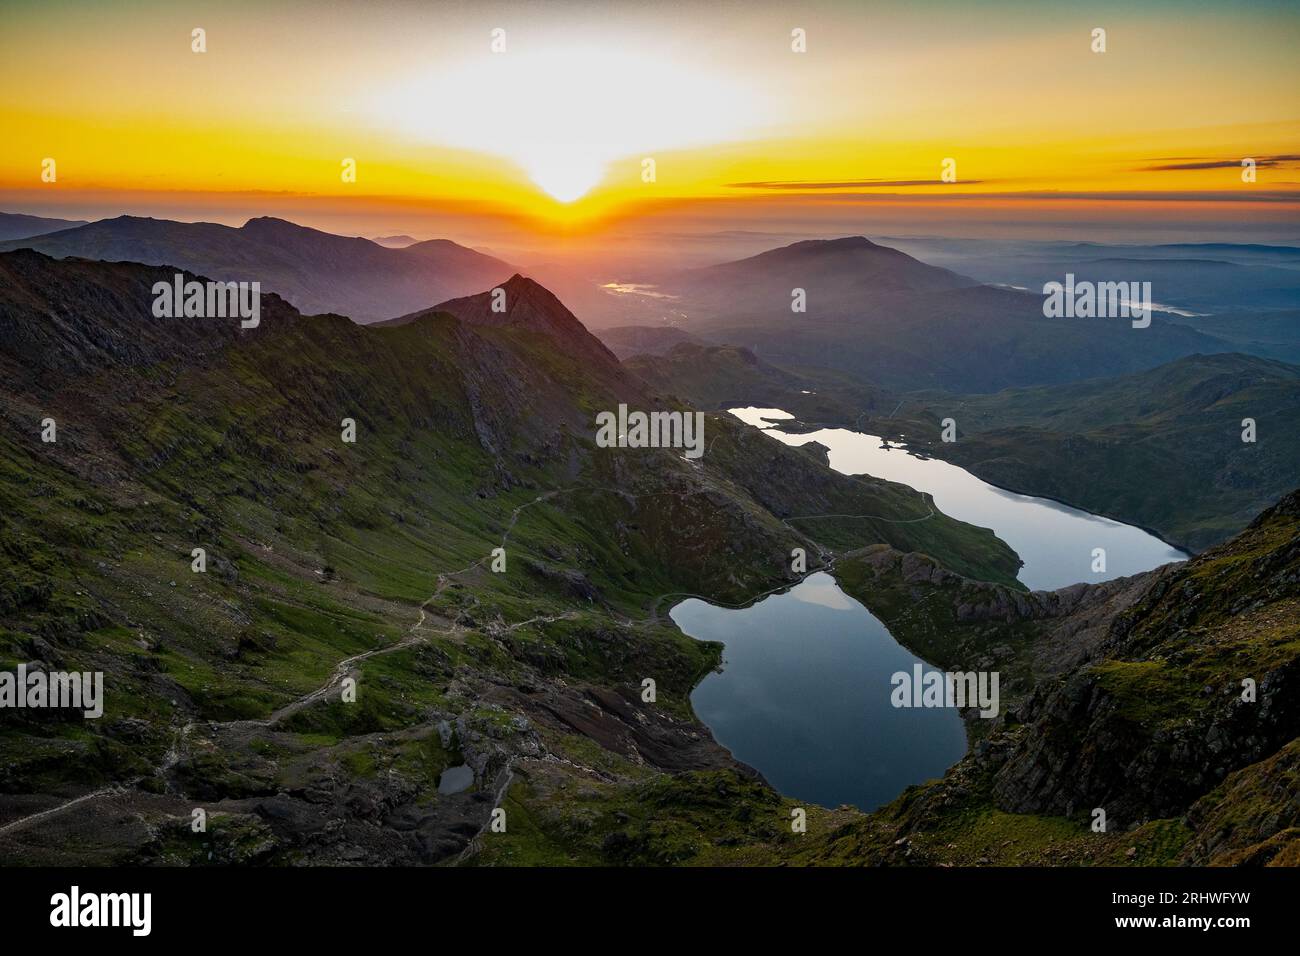 Snowdonia. The sunrise view fromthe top of Mount Snowdon, Yr Wyddfa, looking east towards Glaslyn lake ( nearest camera ) and Llyn Llydaw behind. Snow Stock Photo